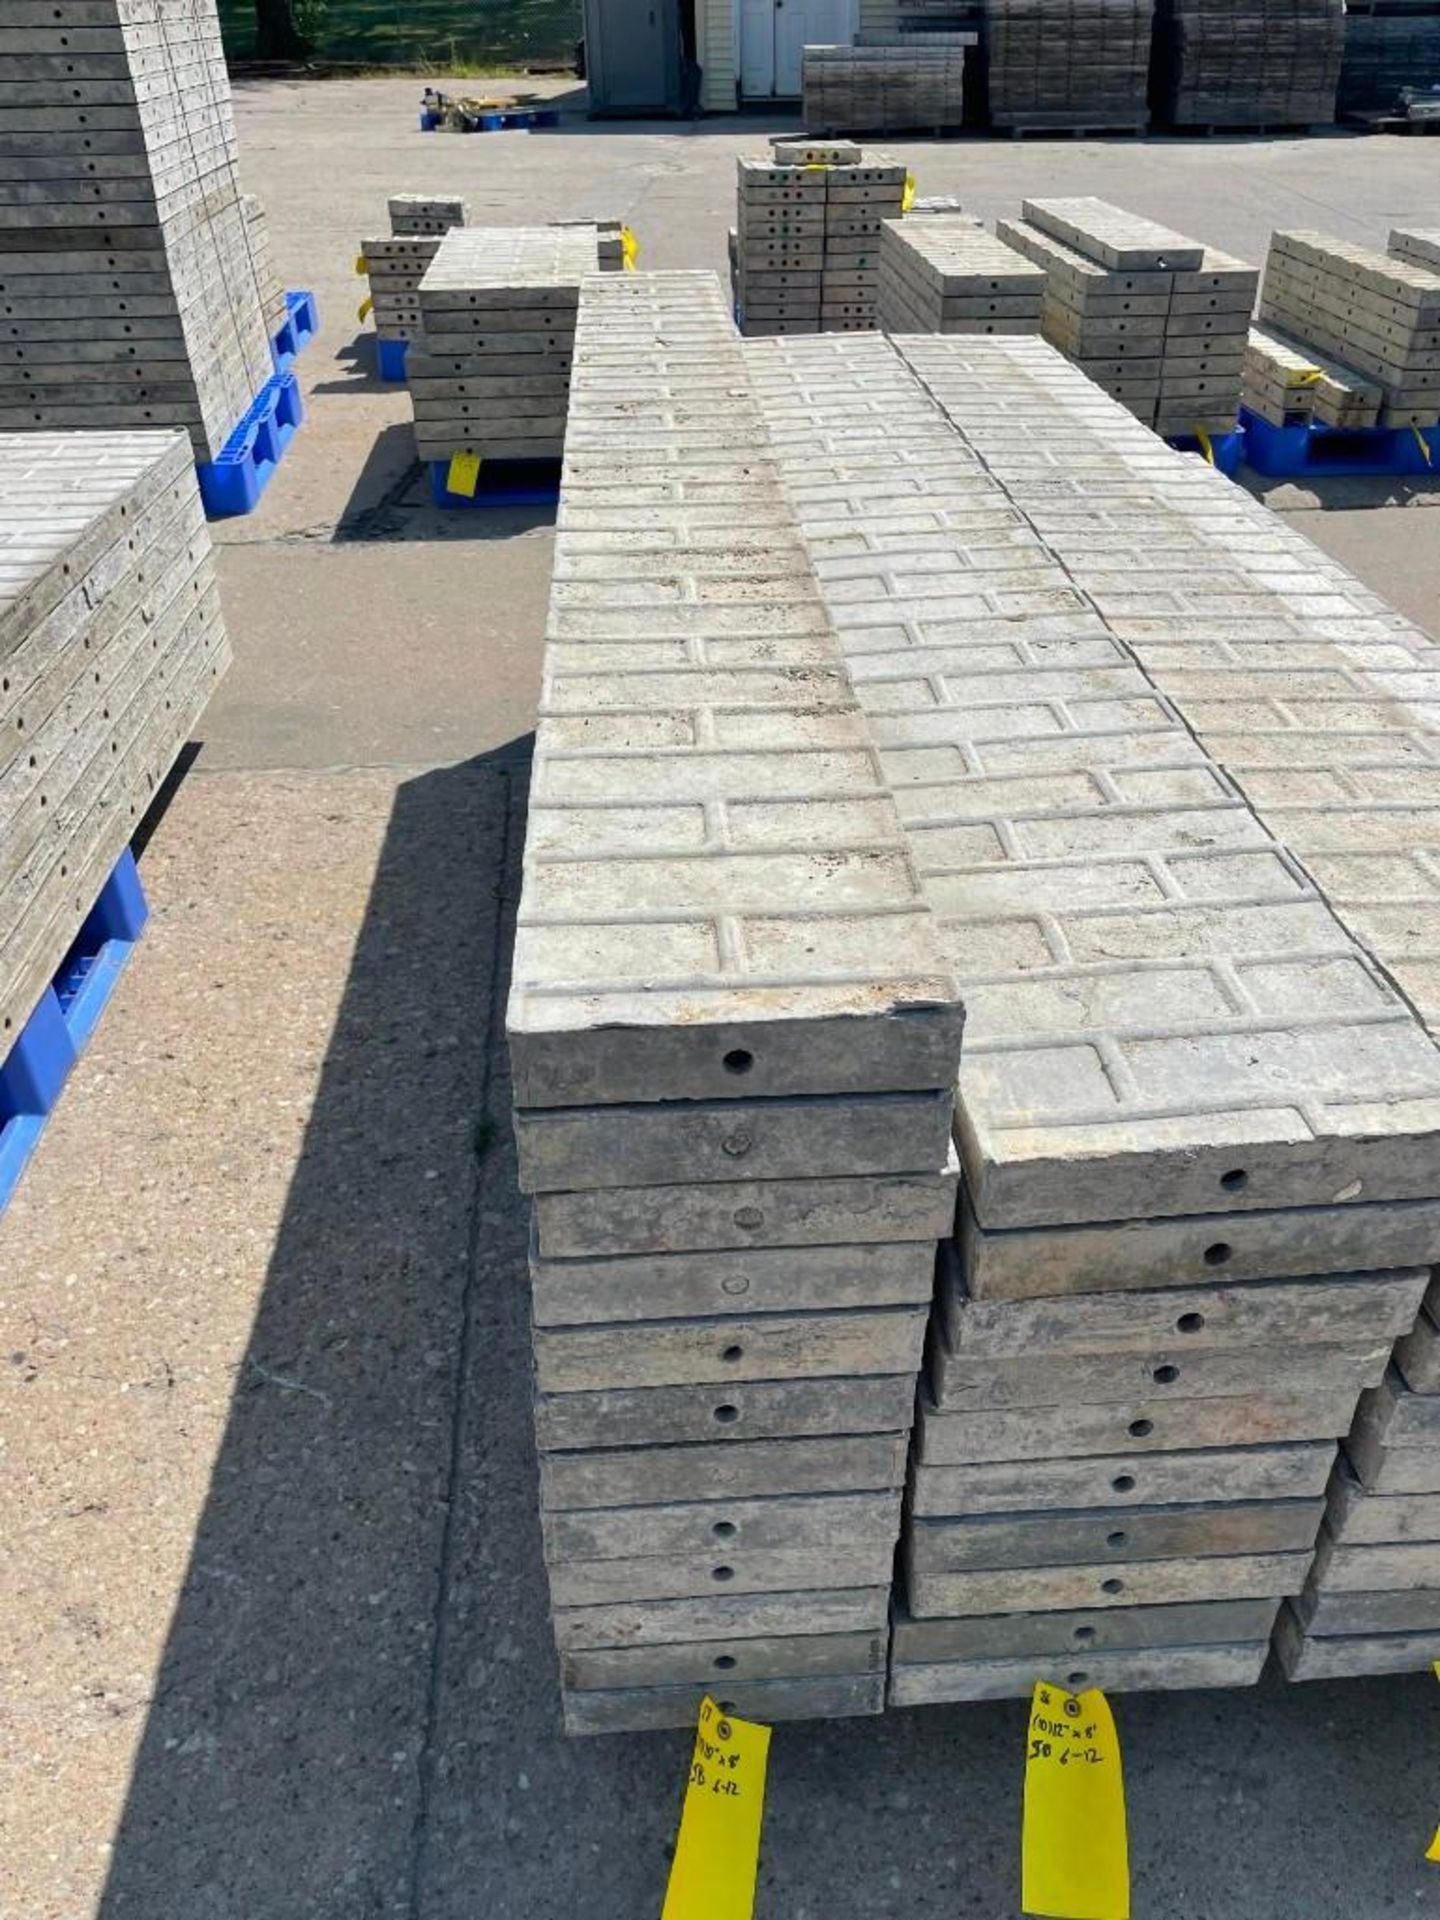 (12) 10" x 8' Symons Smooth Brick Aluminum Concrete Forms 6-12 Hole Pattern. Located in Mt. Pleasant